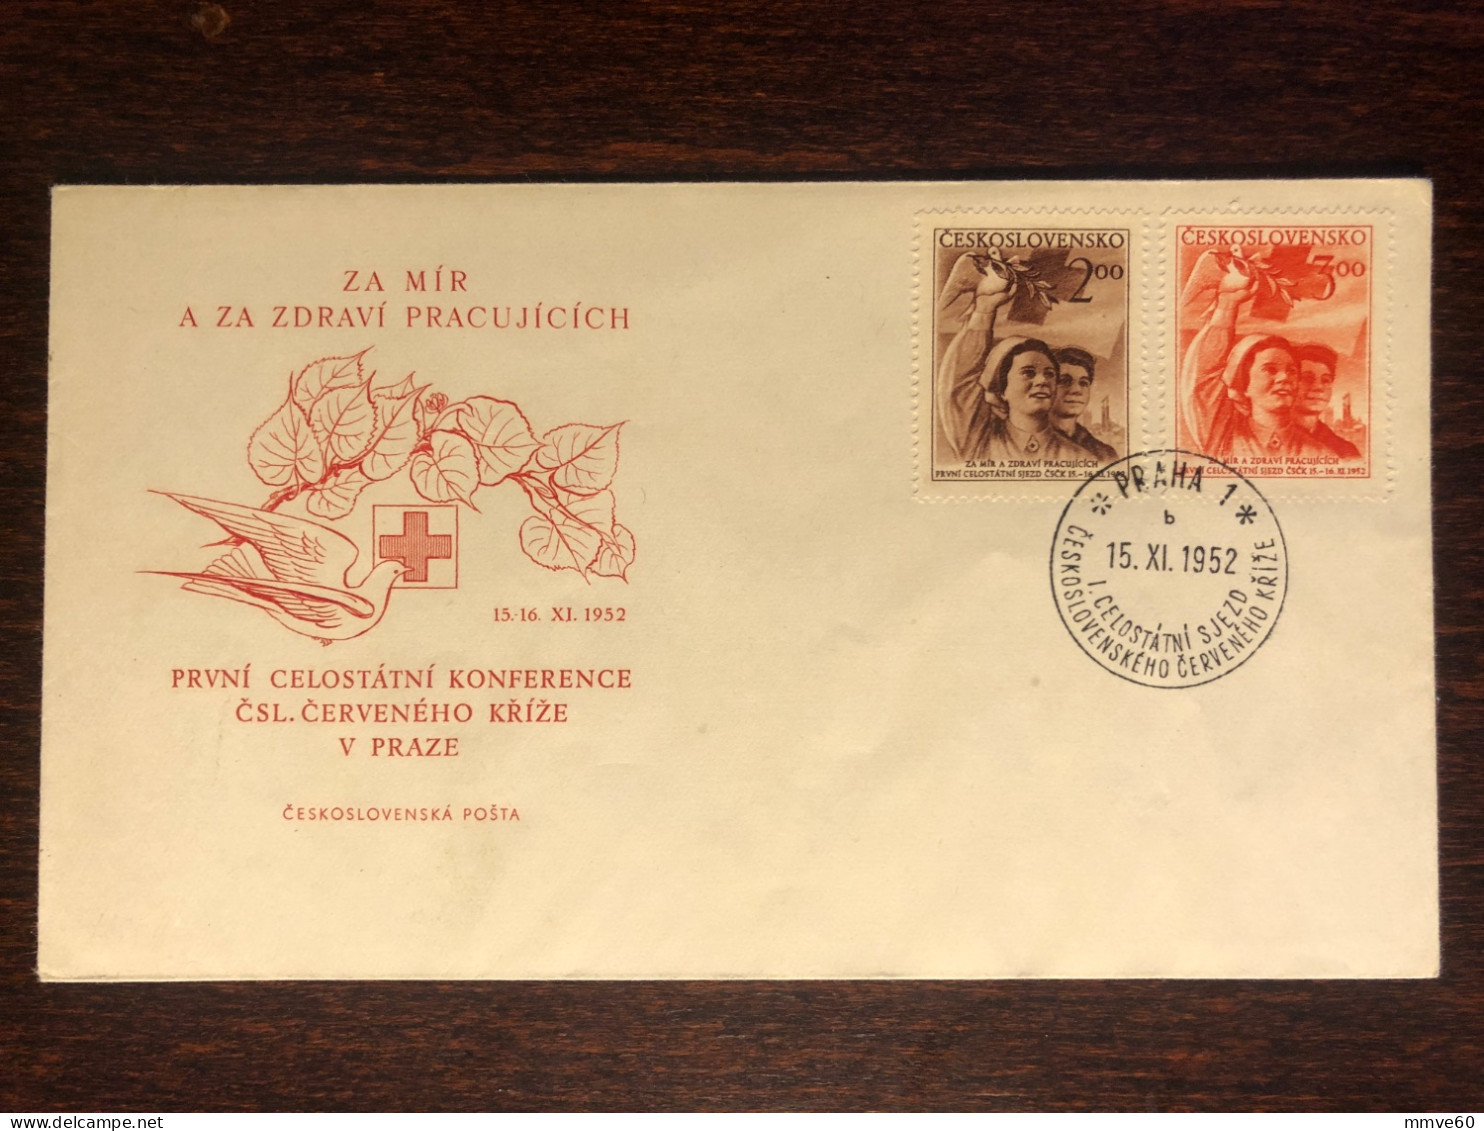 CZECHOSLOVAKIA FDC COVER 1952 YEAR RED CROSS HEALTH MEDICINE STAMPS - FDC